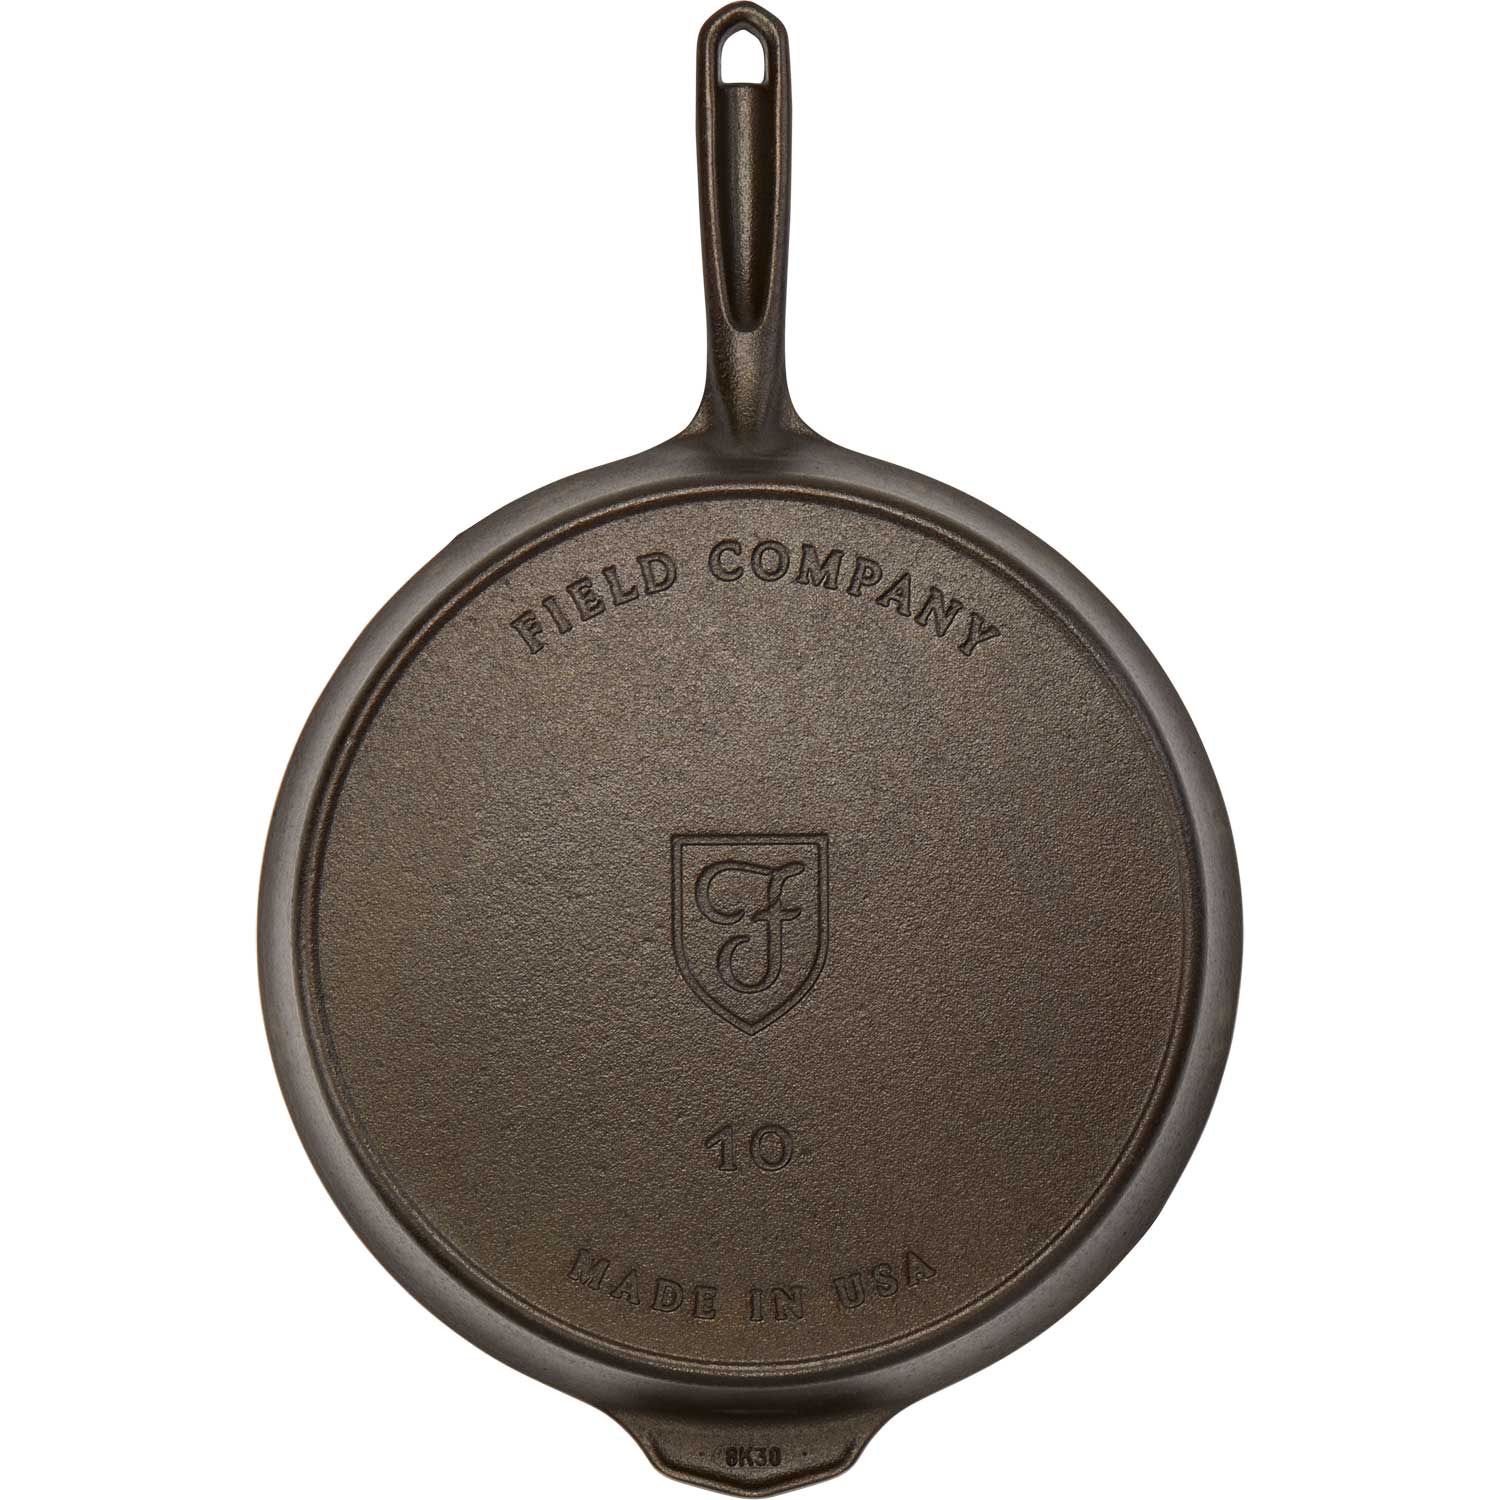 Field Company (Made in USA) No. 10 Cast Iron Skillet | 11.6